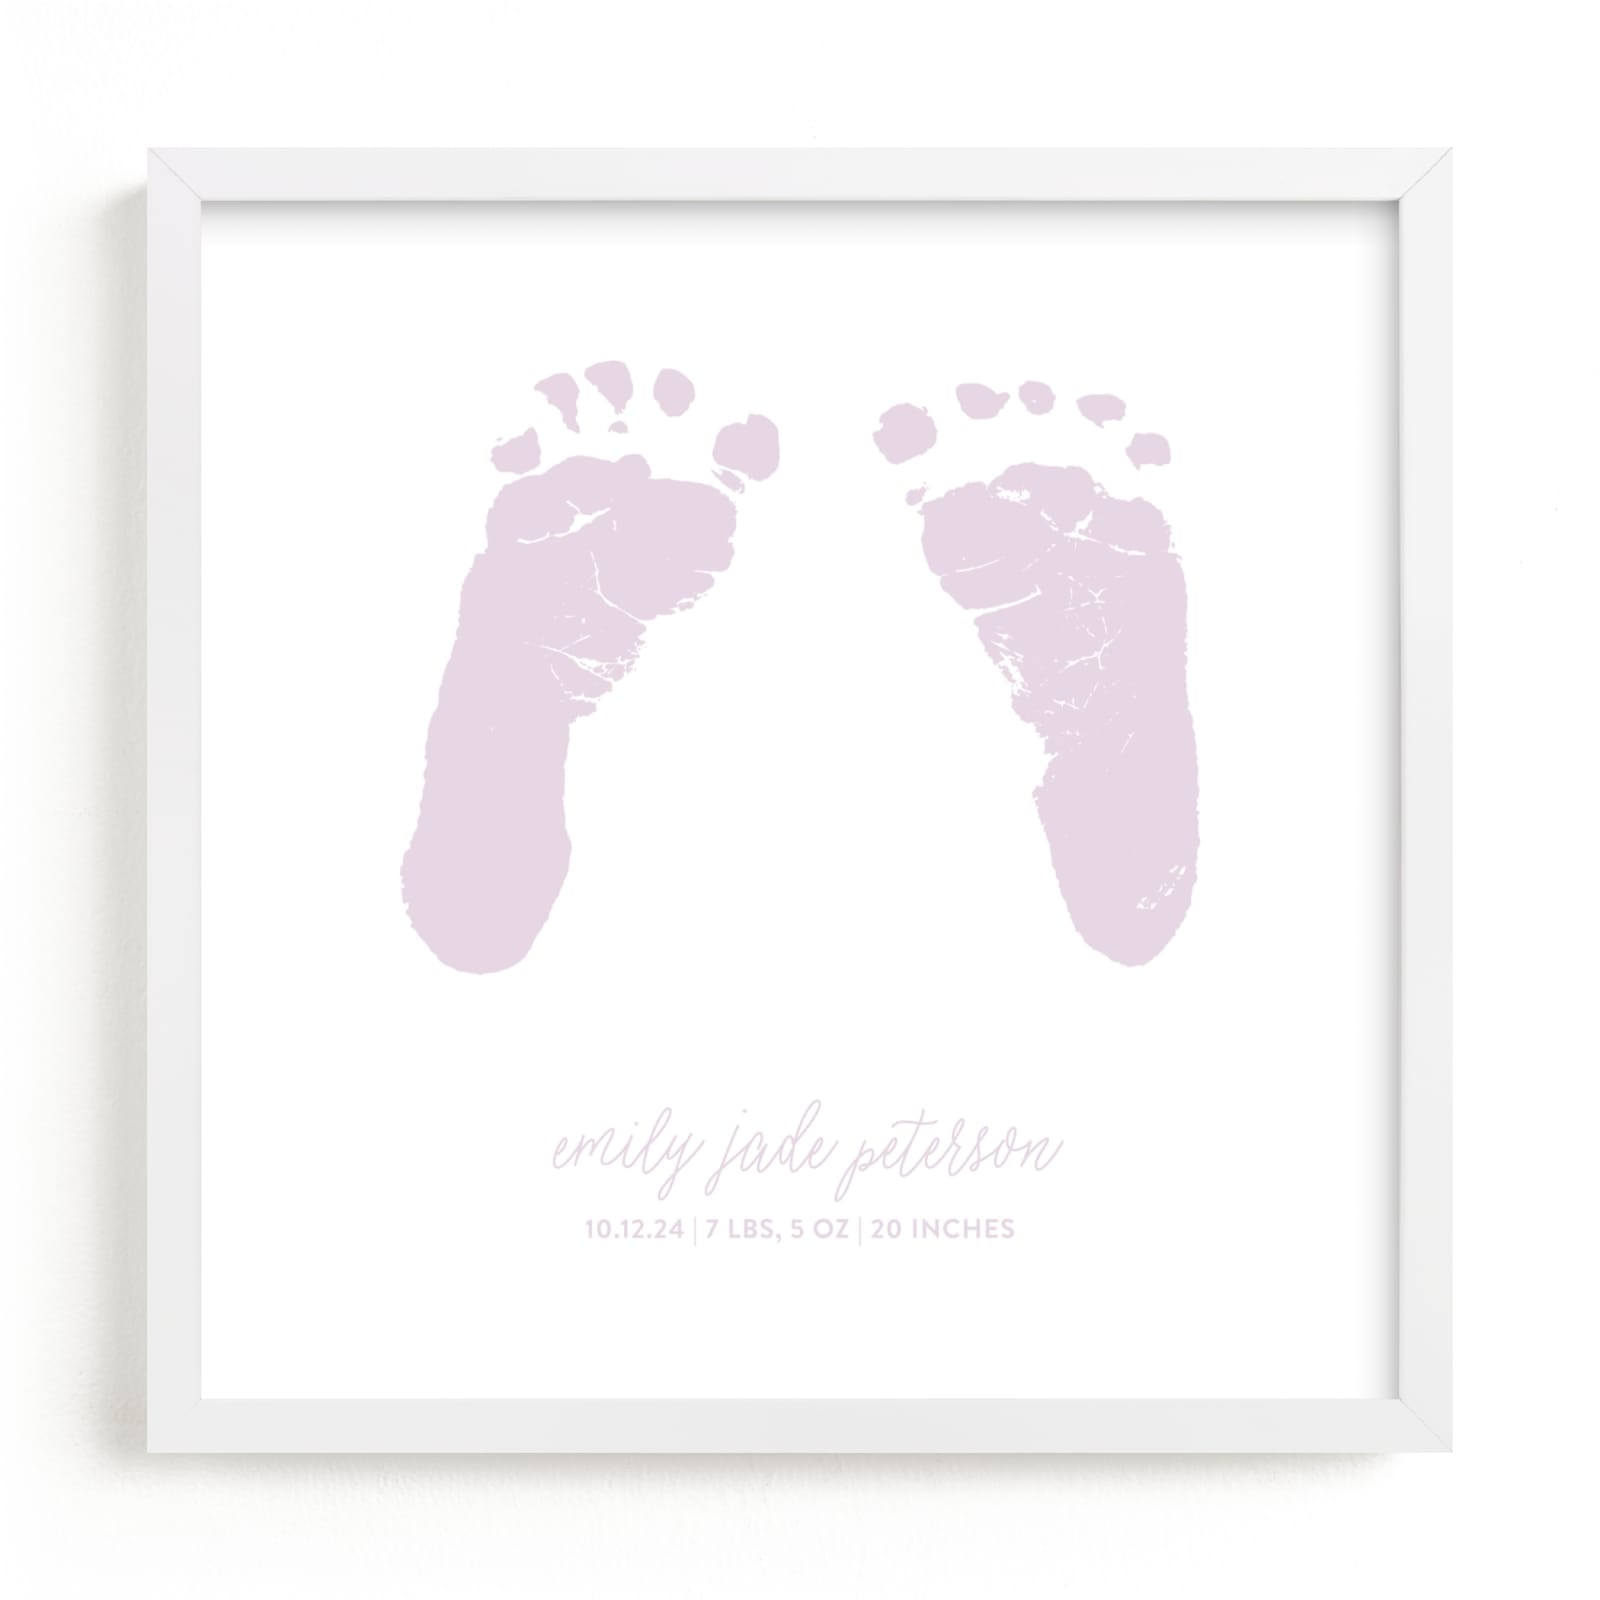 This is a purple photos to art by Minted called Custom Footprints Letterpress Art.